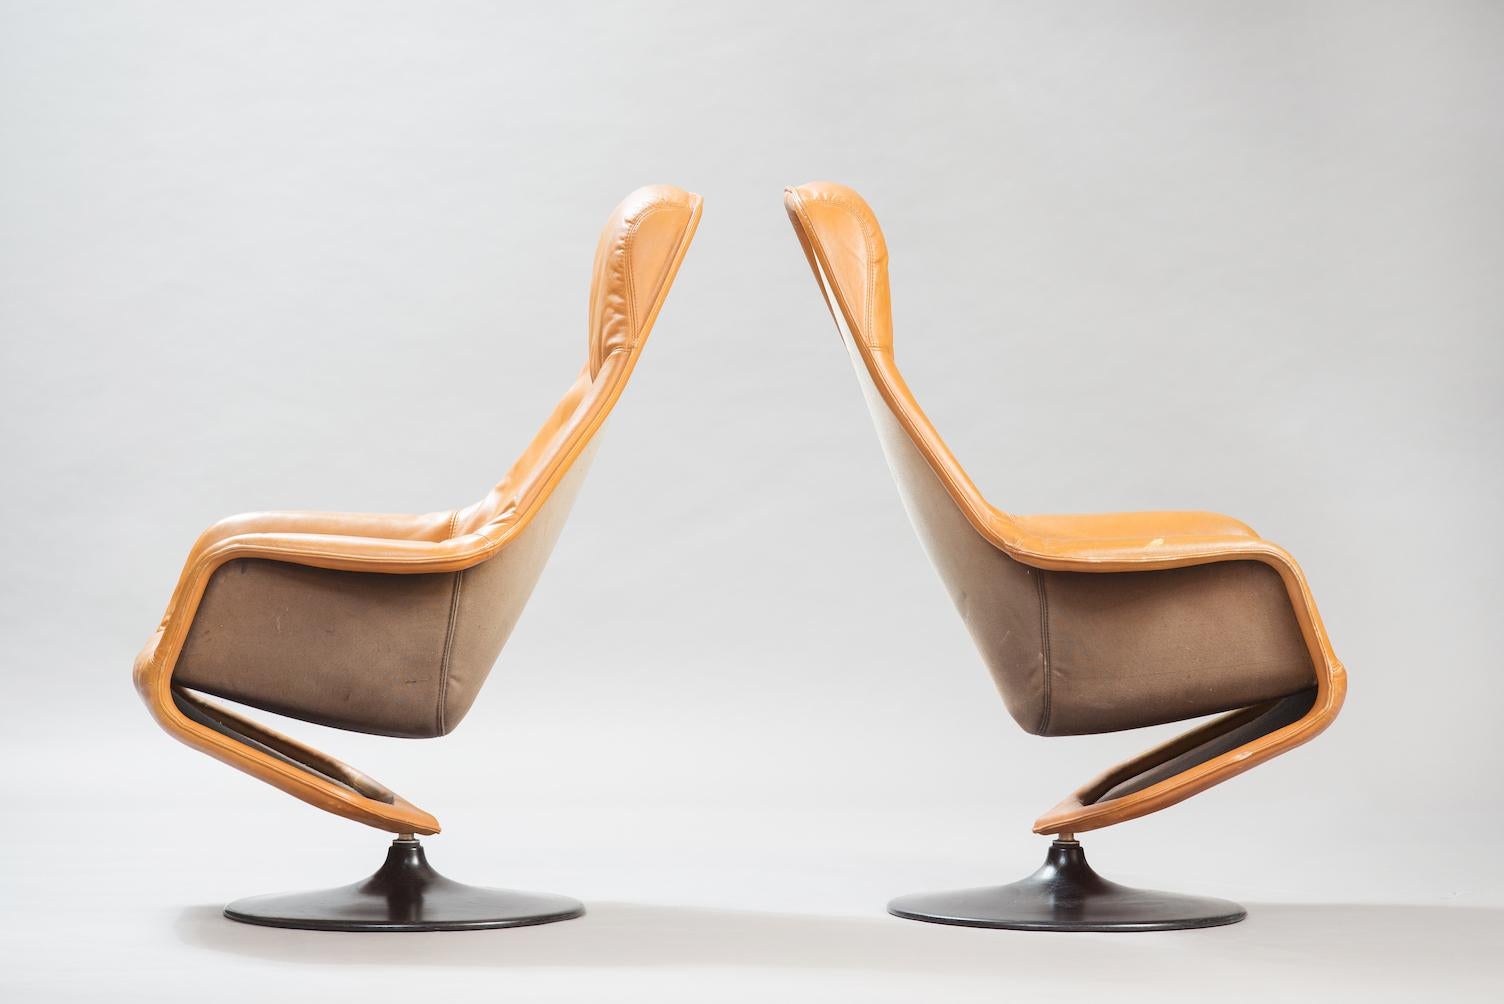 One pair of swivel lounge chairs upholstered in cognac leather in a black lacquered round base.